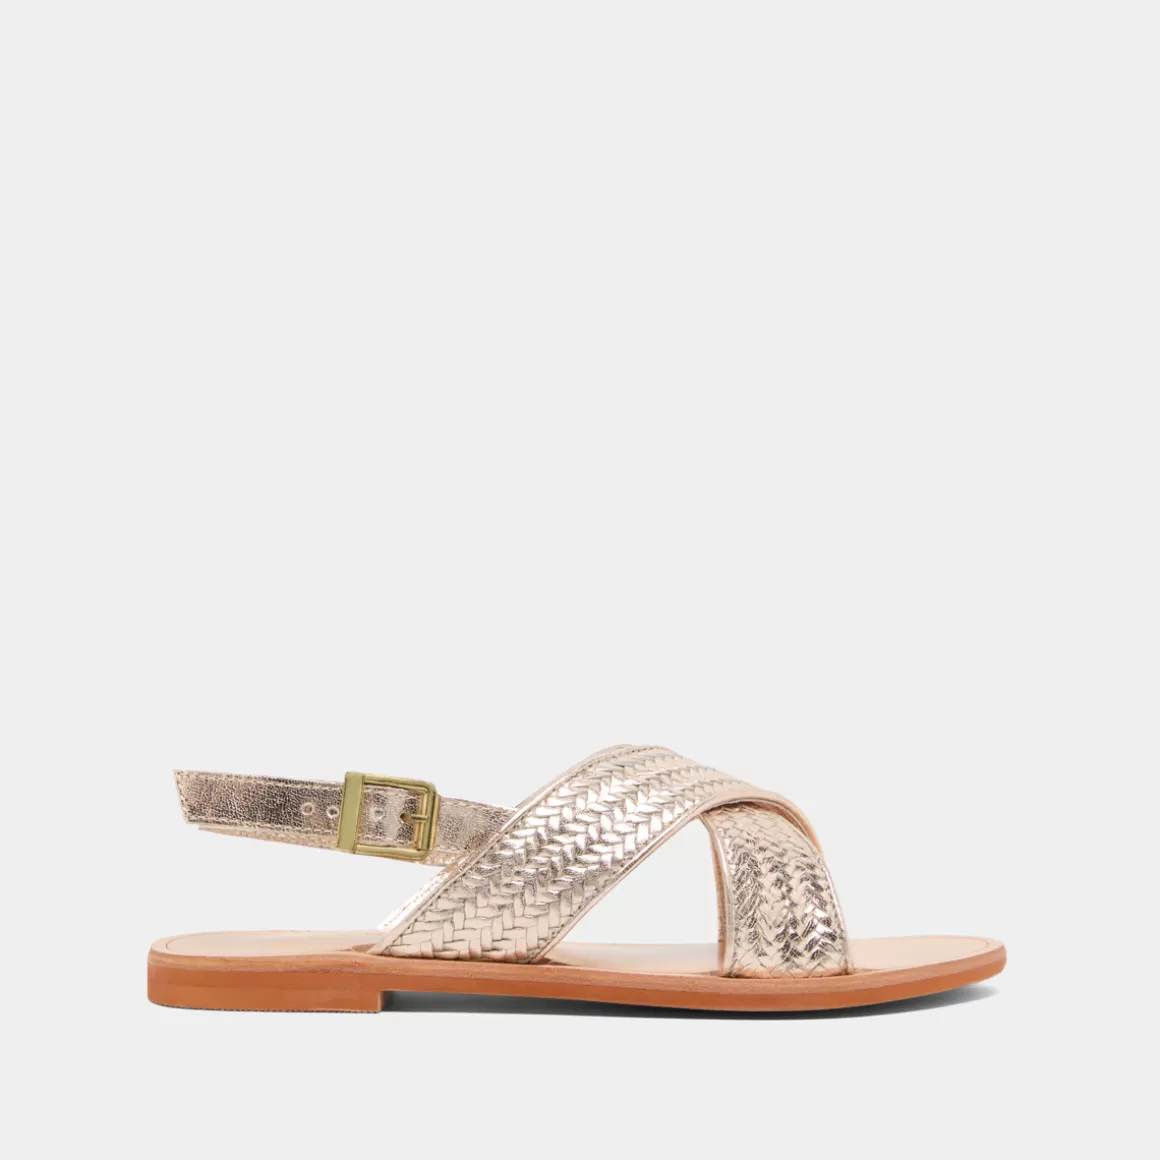 Flat sandals with broad straps<Jonak Store